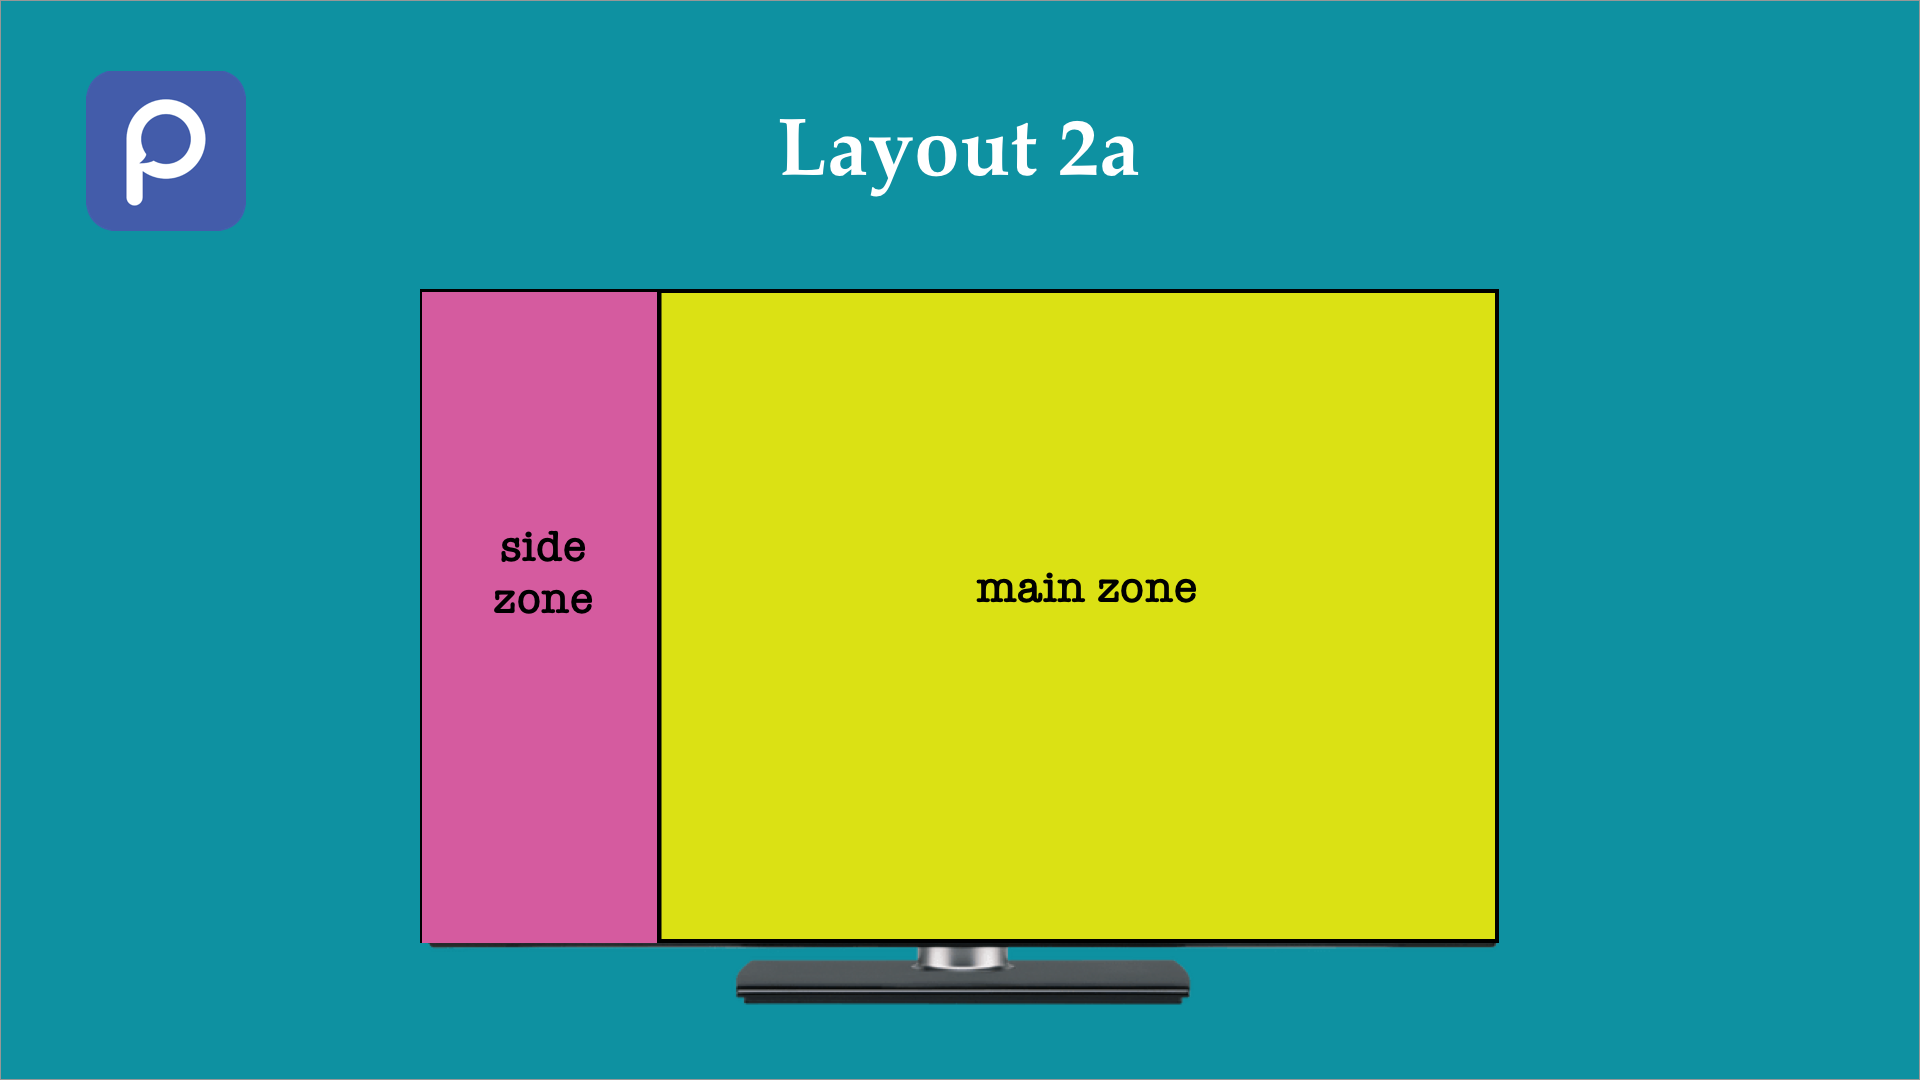 Step by Step demo of creating a 2 zone display in landscape mode - using Layout 2a